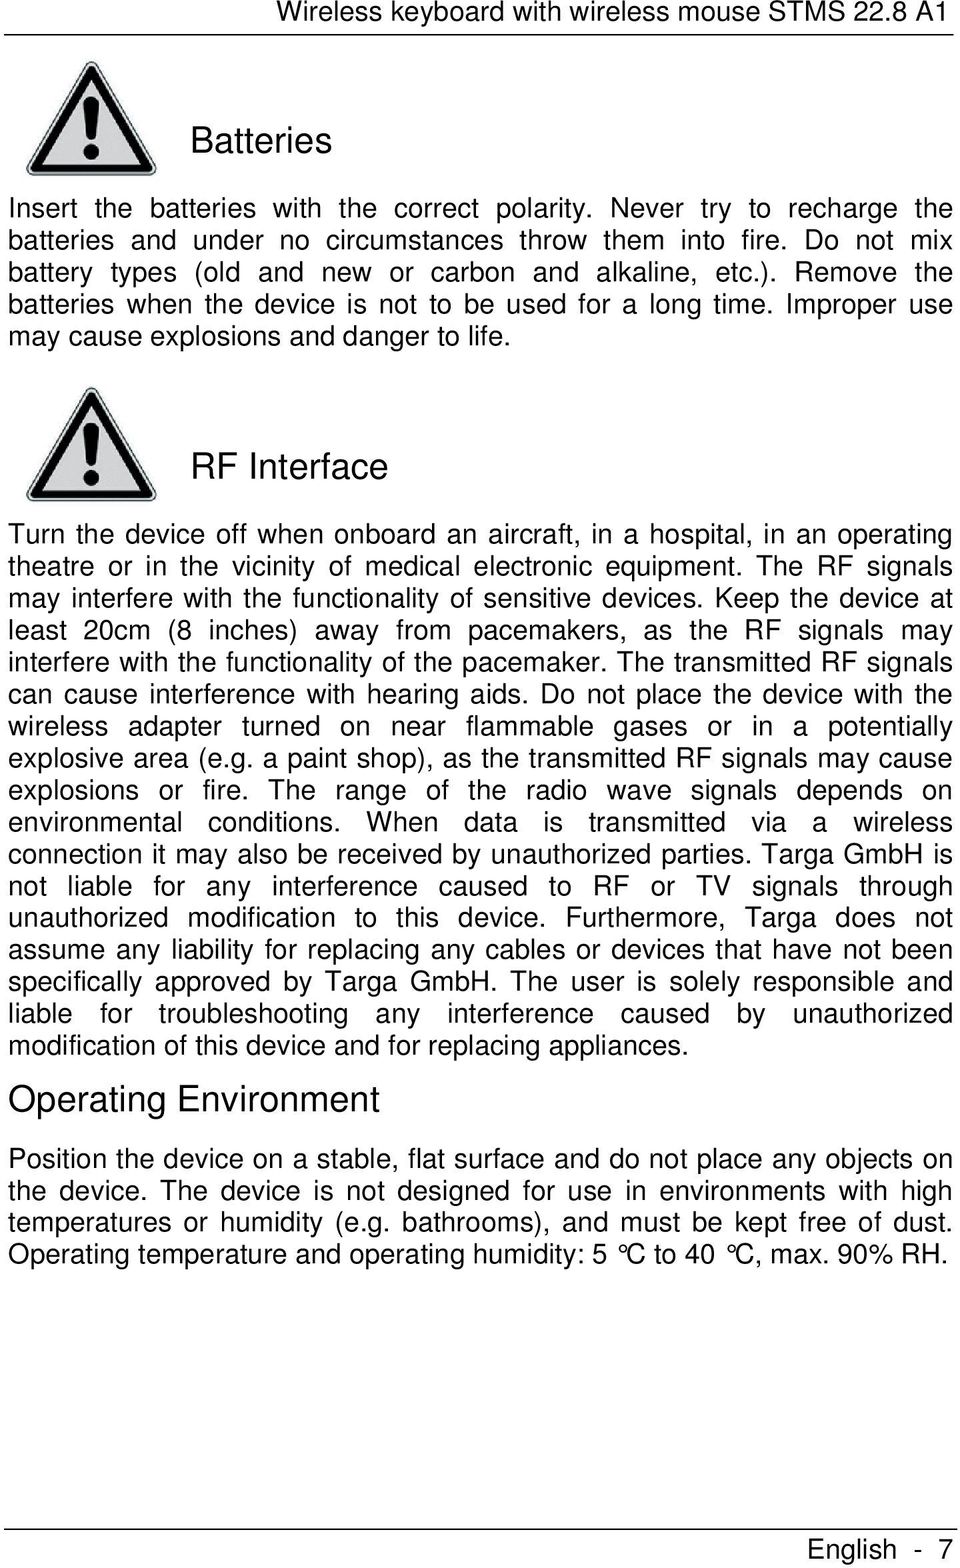 RF Interface Turn the device off when onboard an aircraft, in a hospital, in an operating theatre or in the vicinity of medical electronic equipment.